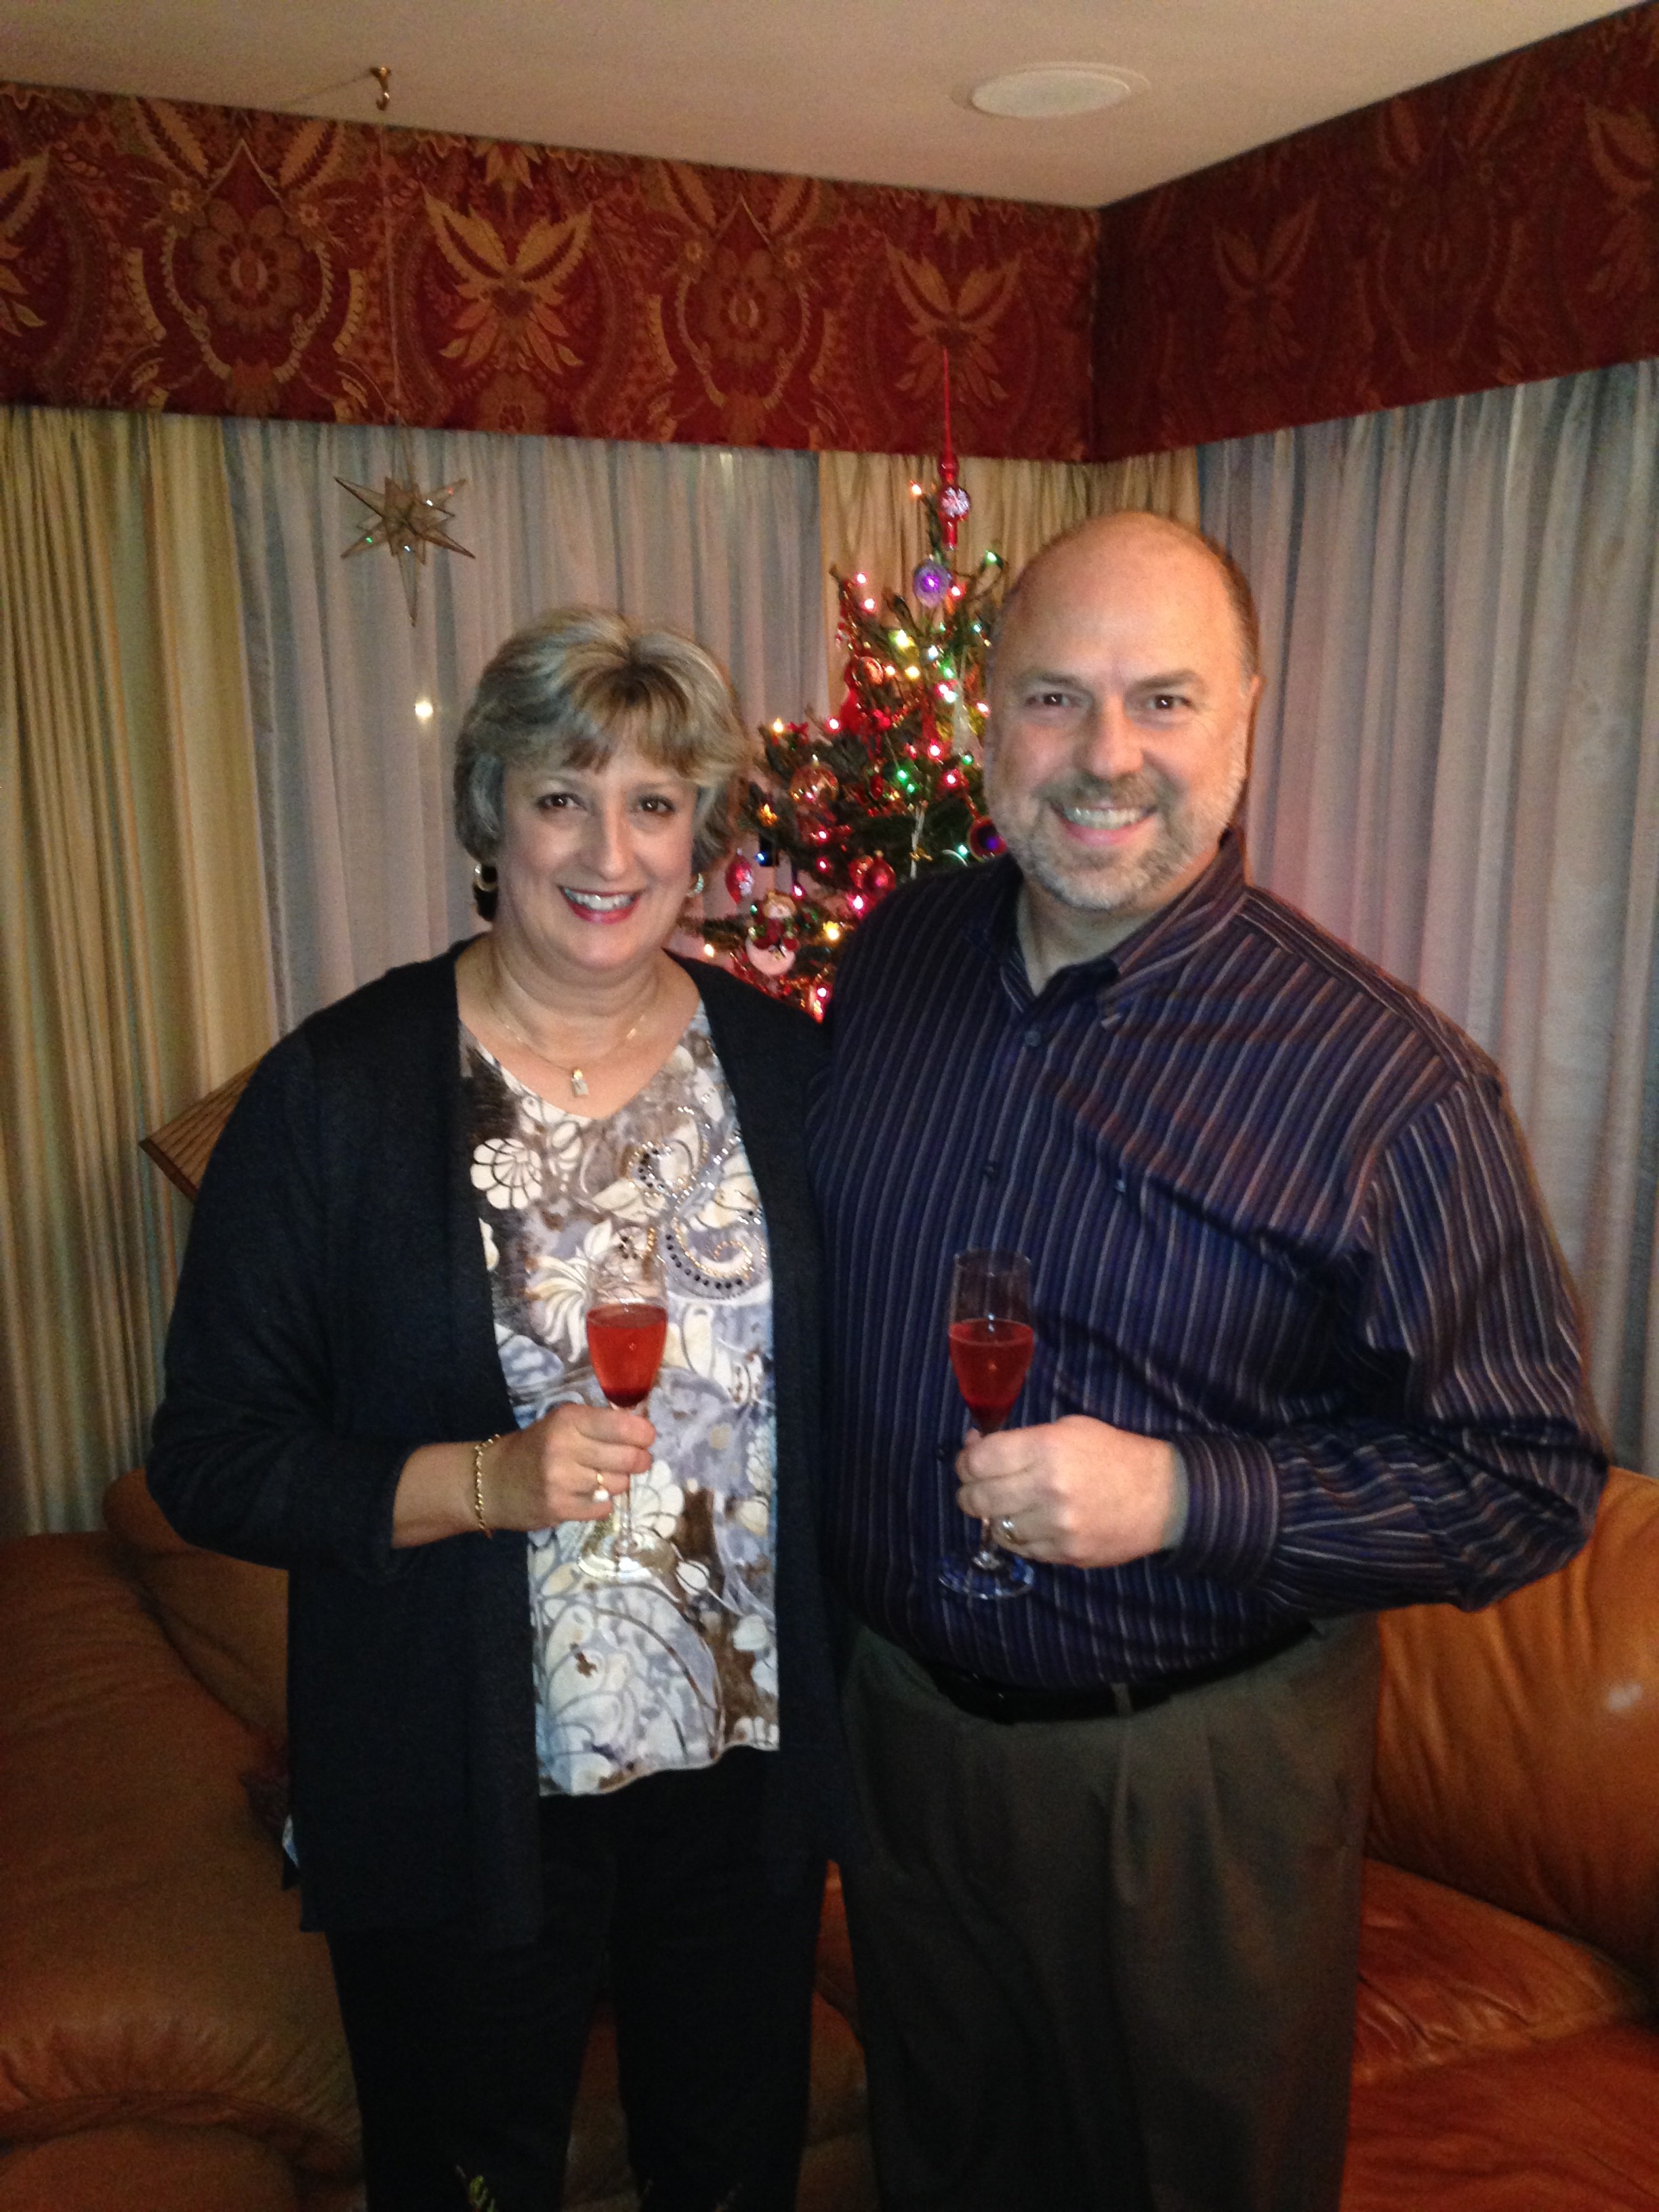 No food pics, but here's a picture of Nancy and I - Kurt K's Christmas Dinner Party - December 2013